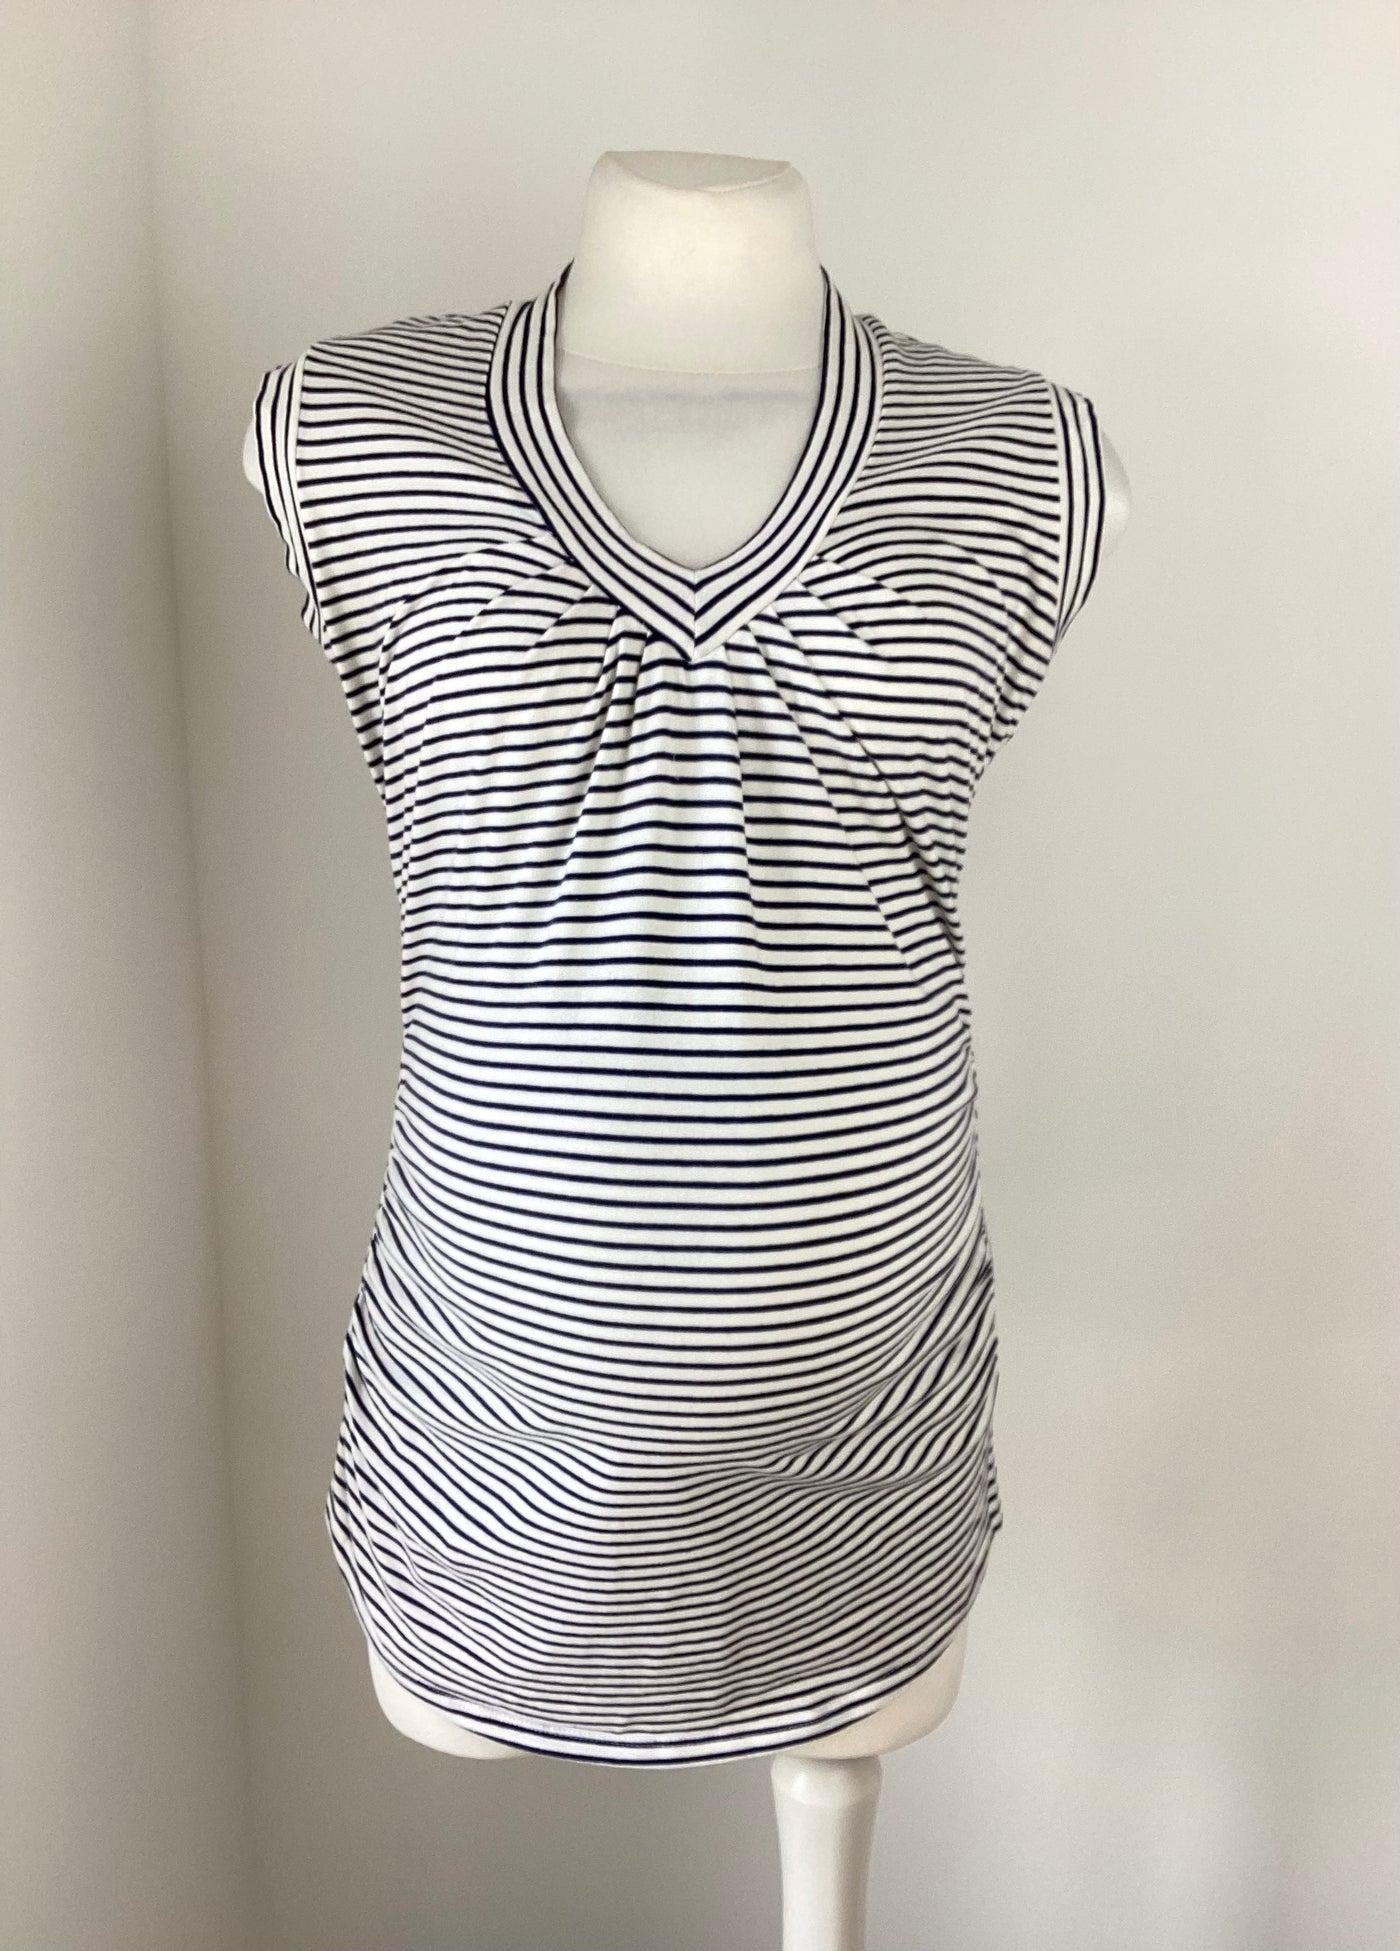 Blossom navy & white striped sleeveless top  - Size L (Approx UK 10/12)